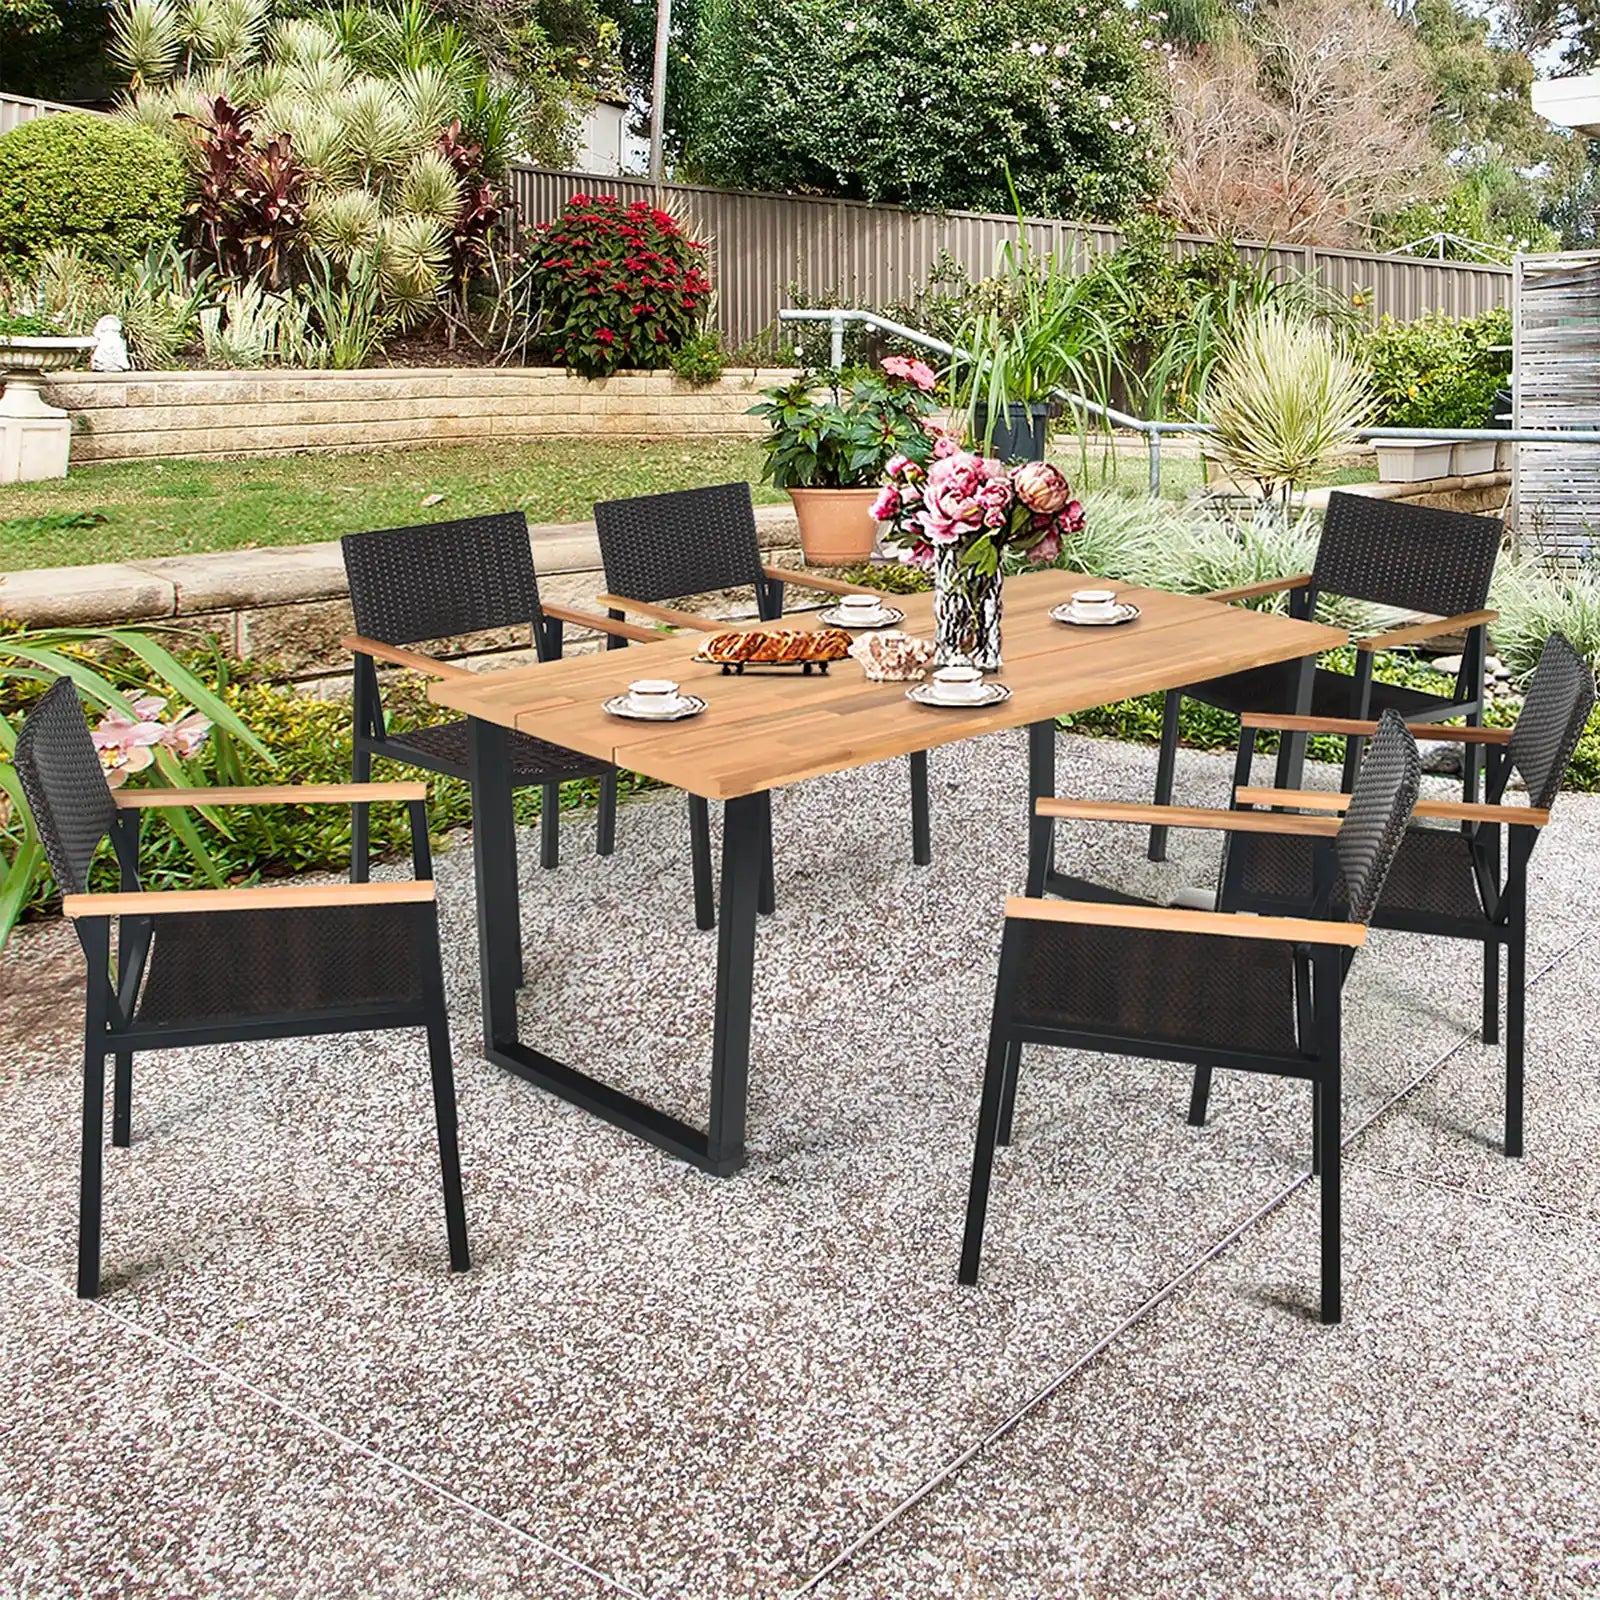 Stylish and Durable Outdoor Dining Set | Weather-Resistant Furniture for Gardens, Patios, and Poolside | 7-Piece Set with Umbrella Hole